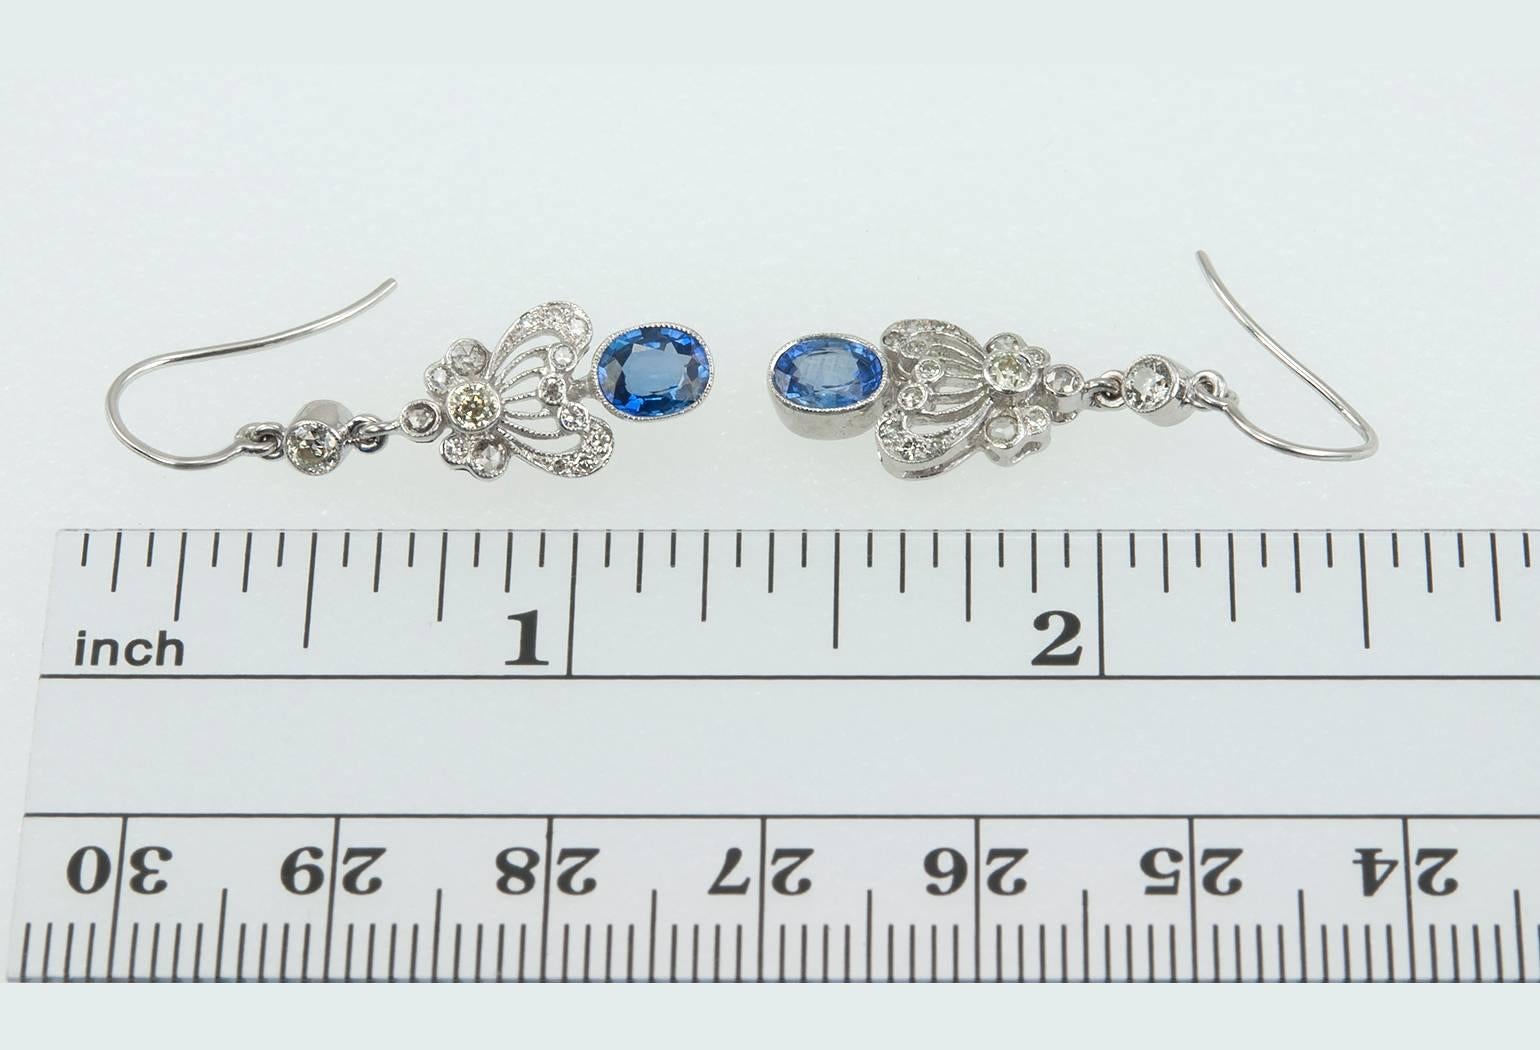 These pretty diamond and sapphire earrings were made in the Edwardian style.  They feature Old European Cut diamonds in a bezel setting with oval sapphires in 18 karat white gold.  The total diamond weight is approximately 0.40 carats and 0.40